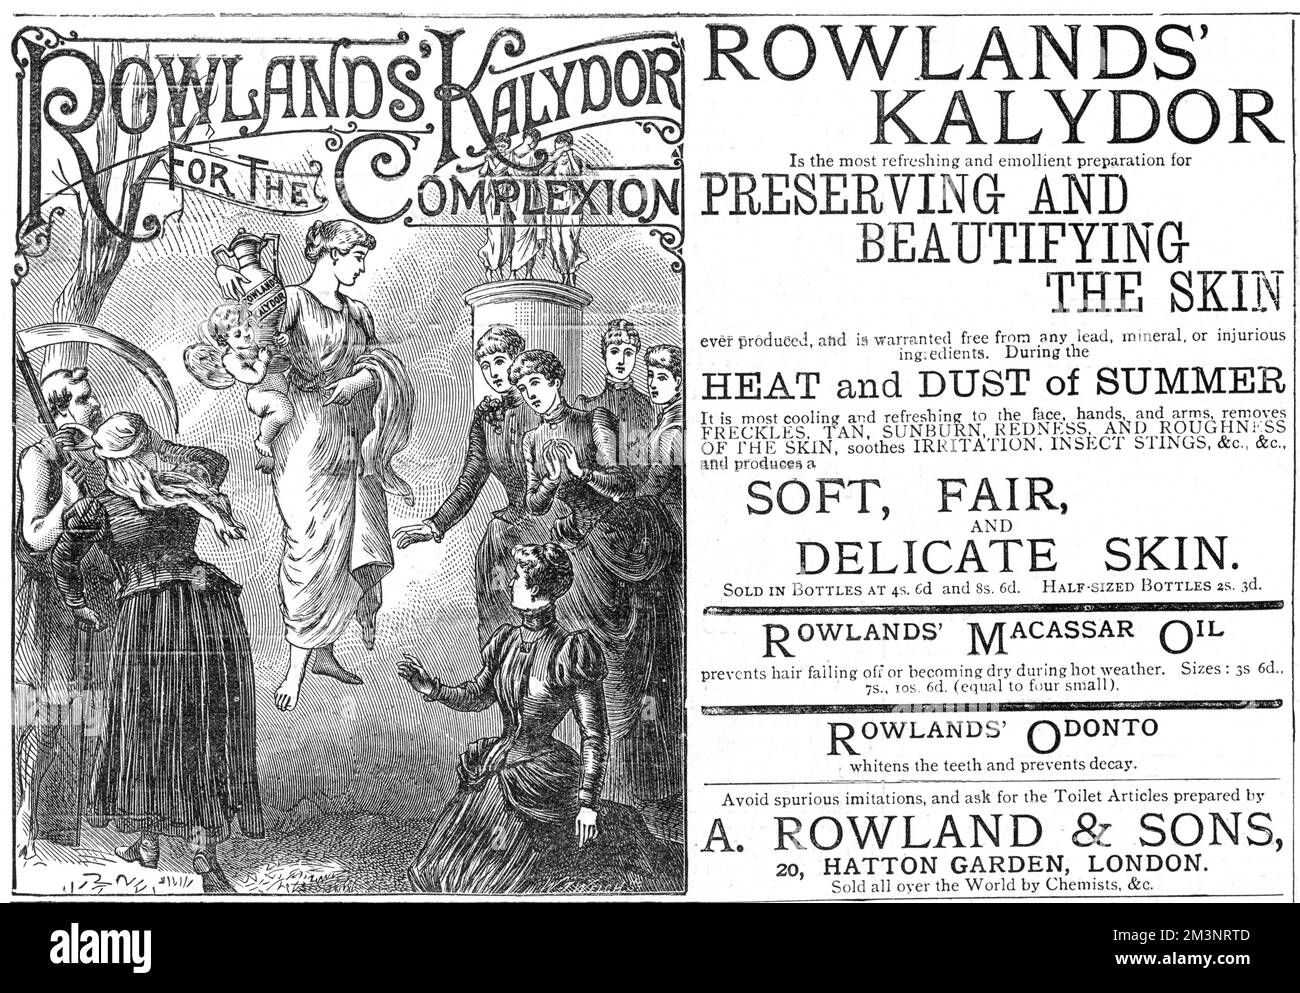 An advertisement for Rowlands' Kalydor-a most refreshing and emollient preparation for preserving and beautifying the skin. The advert is accompanied by an rather fanciful depiction of a clear-skinned beauty descending from the sky, clutching a bottle of Rowlands' Kalydor, accompanied by a cherub. Victorian young ladies look on with understandable suprise, whilst old Father Time and a personification of Age recoil in horror. Rowlands' macassar oil and Odonto tooth powder is also promoted.  1887 Stock Photo